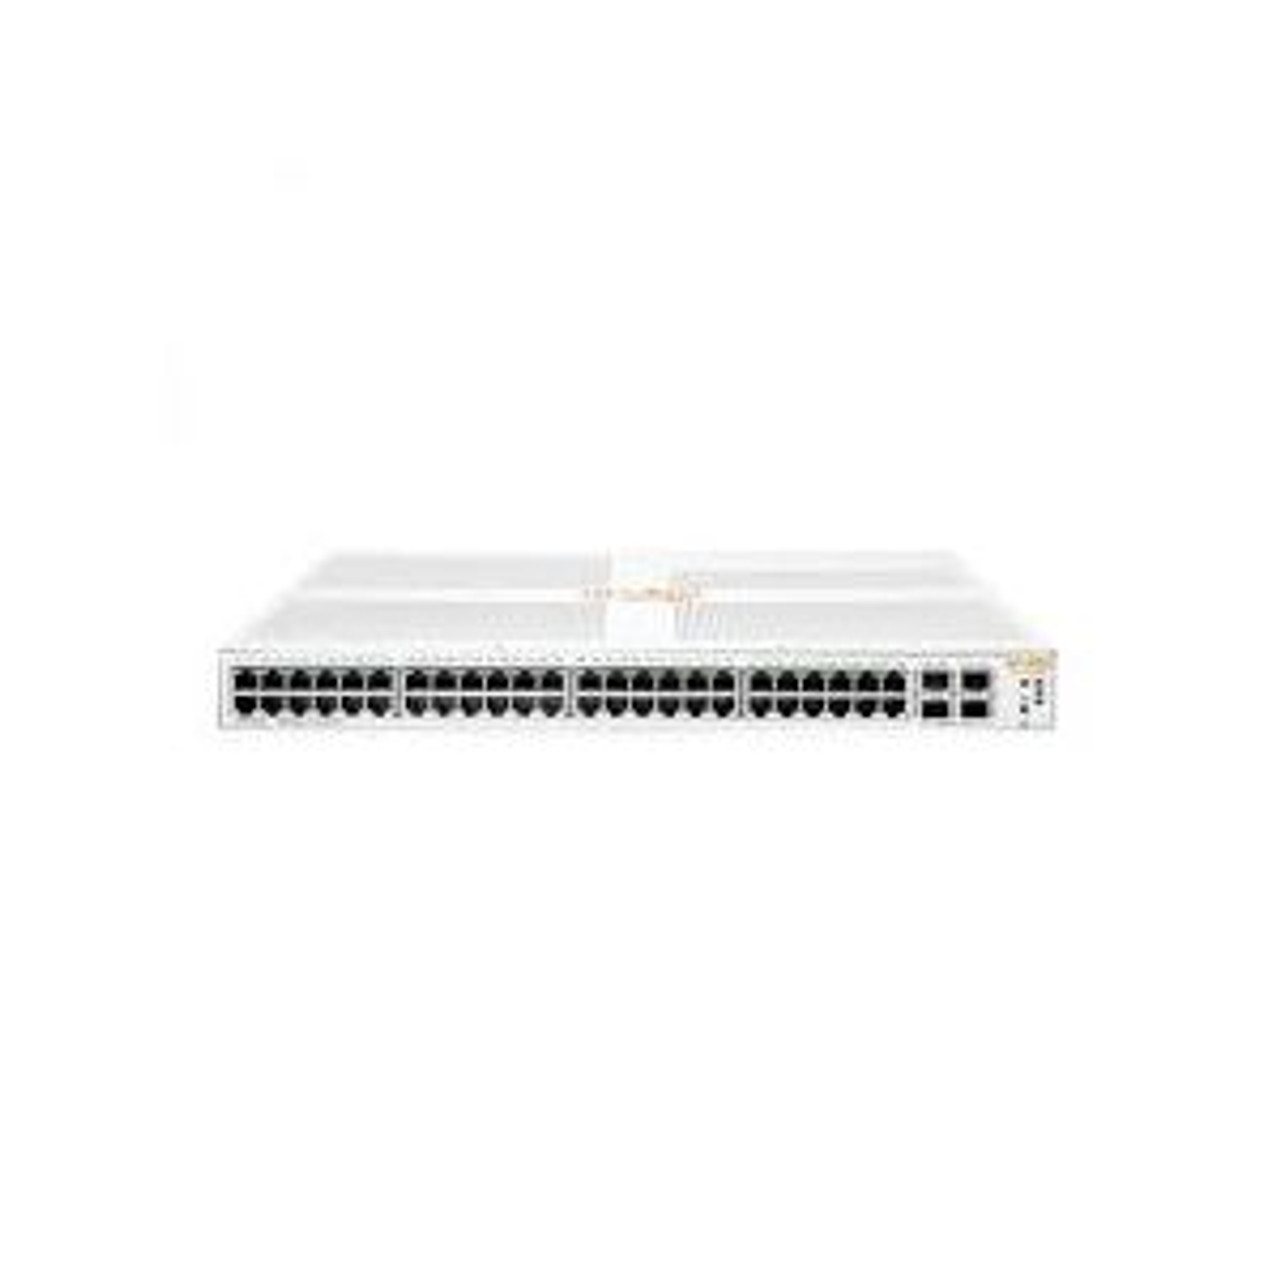 JL685A#ABB | Aruba | Instant On 48 Ports Yes Ethernet Switch